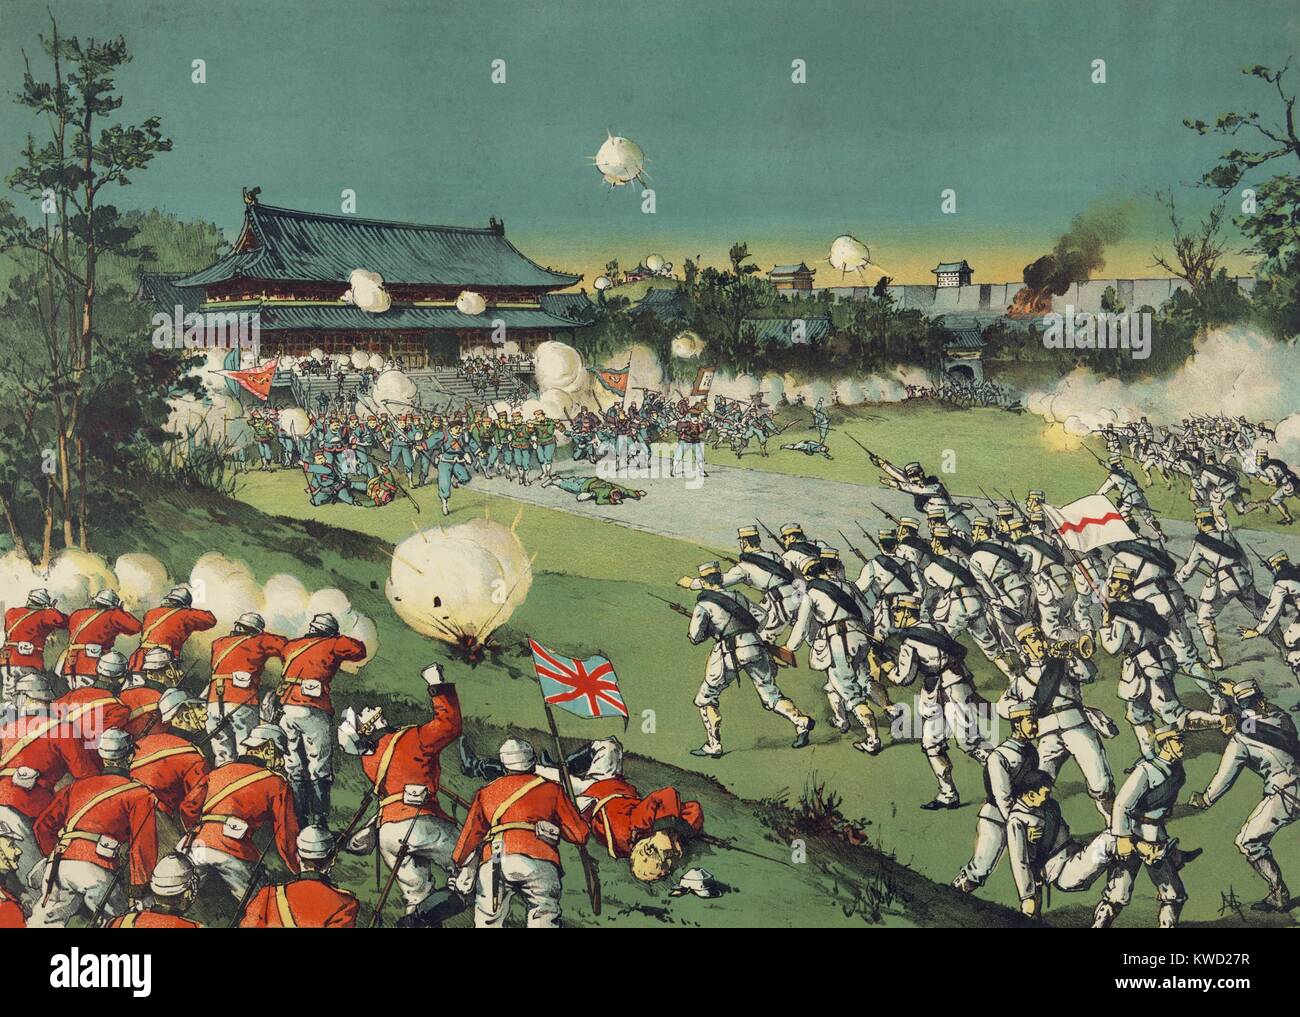 British and Japanese soldiers assaulting the Boxer forces at Imperial Castle, August 1900. They fought within the Forbidden City, the palace complex in central Beijing, China, during the Boxer Rebellion  (BSLOC 2017 20 30) Stock Photo